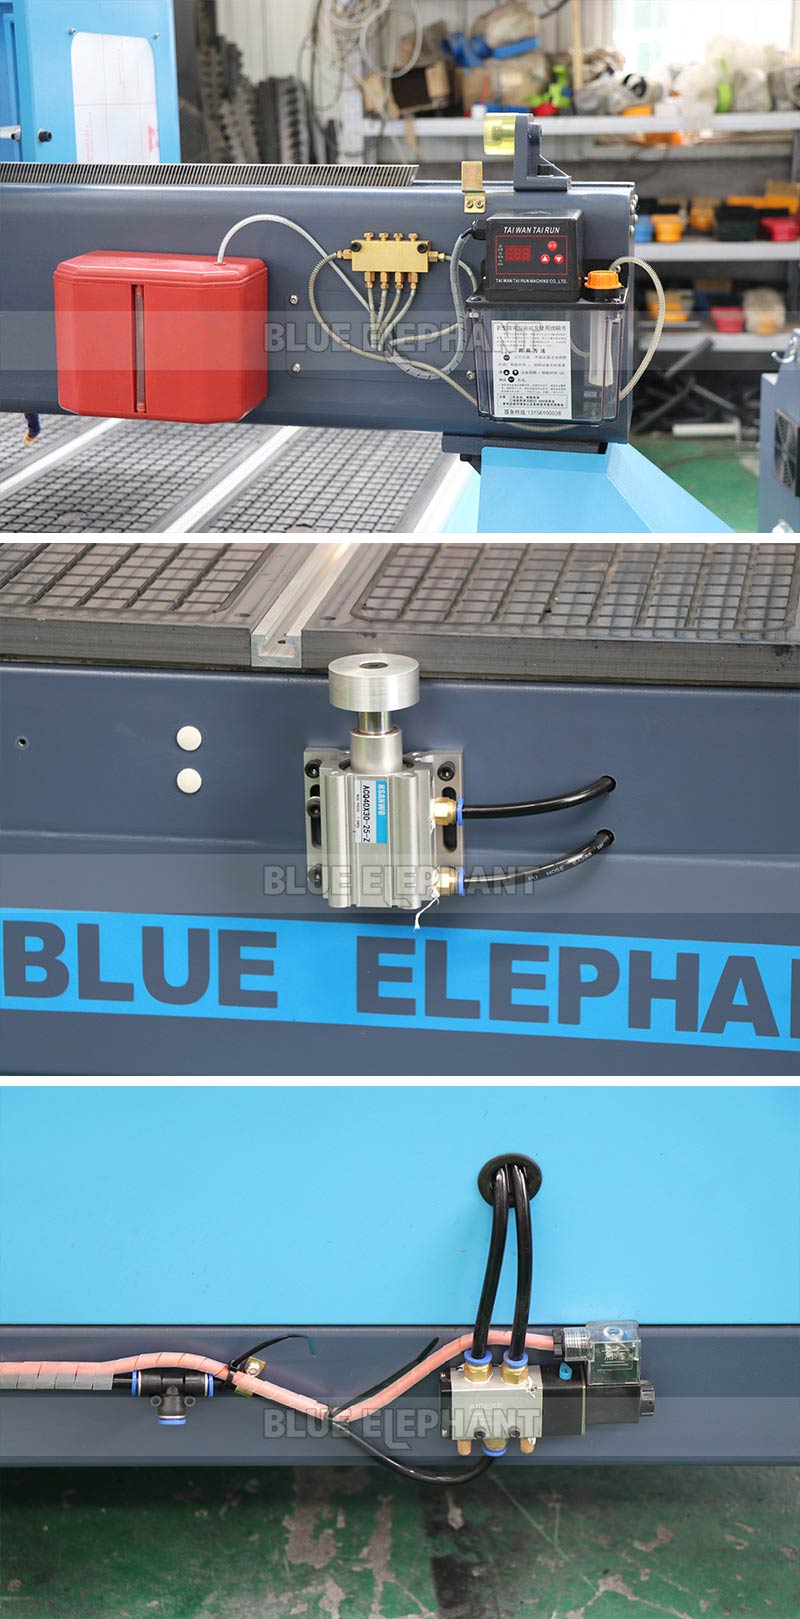 blue elephant wood craft engraving machine 1325 cnc router for small Craft shop